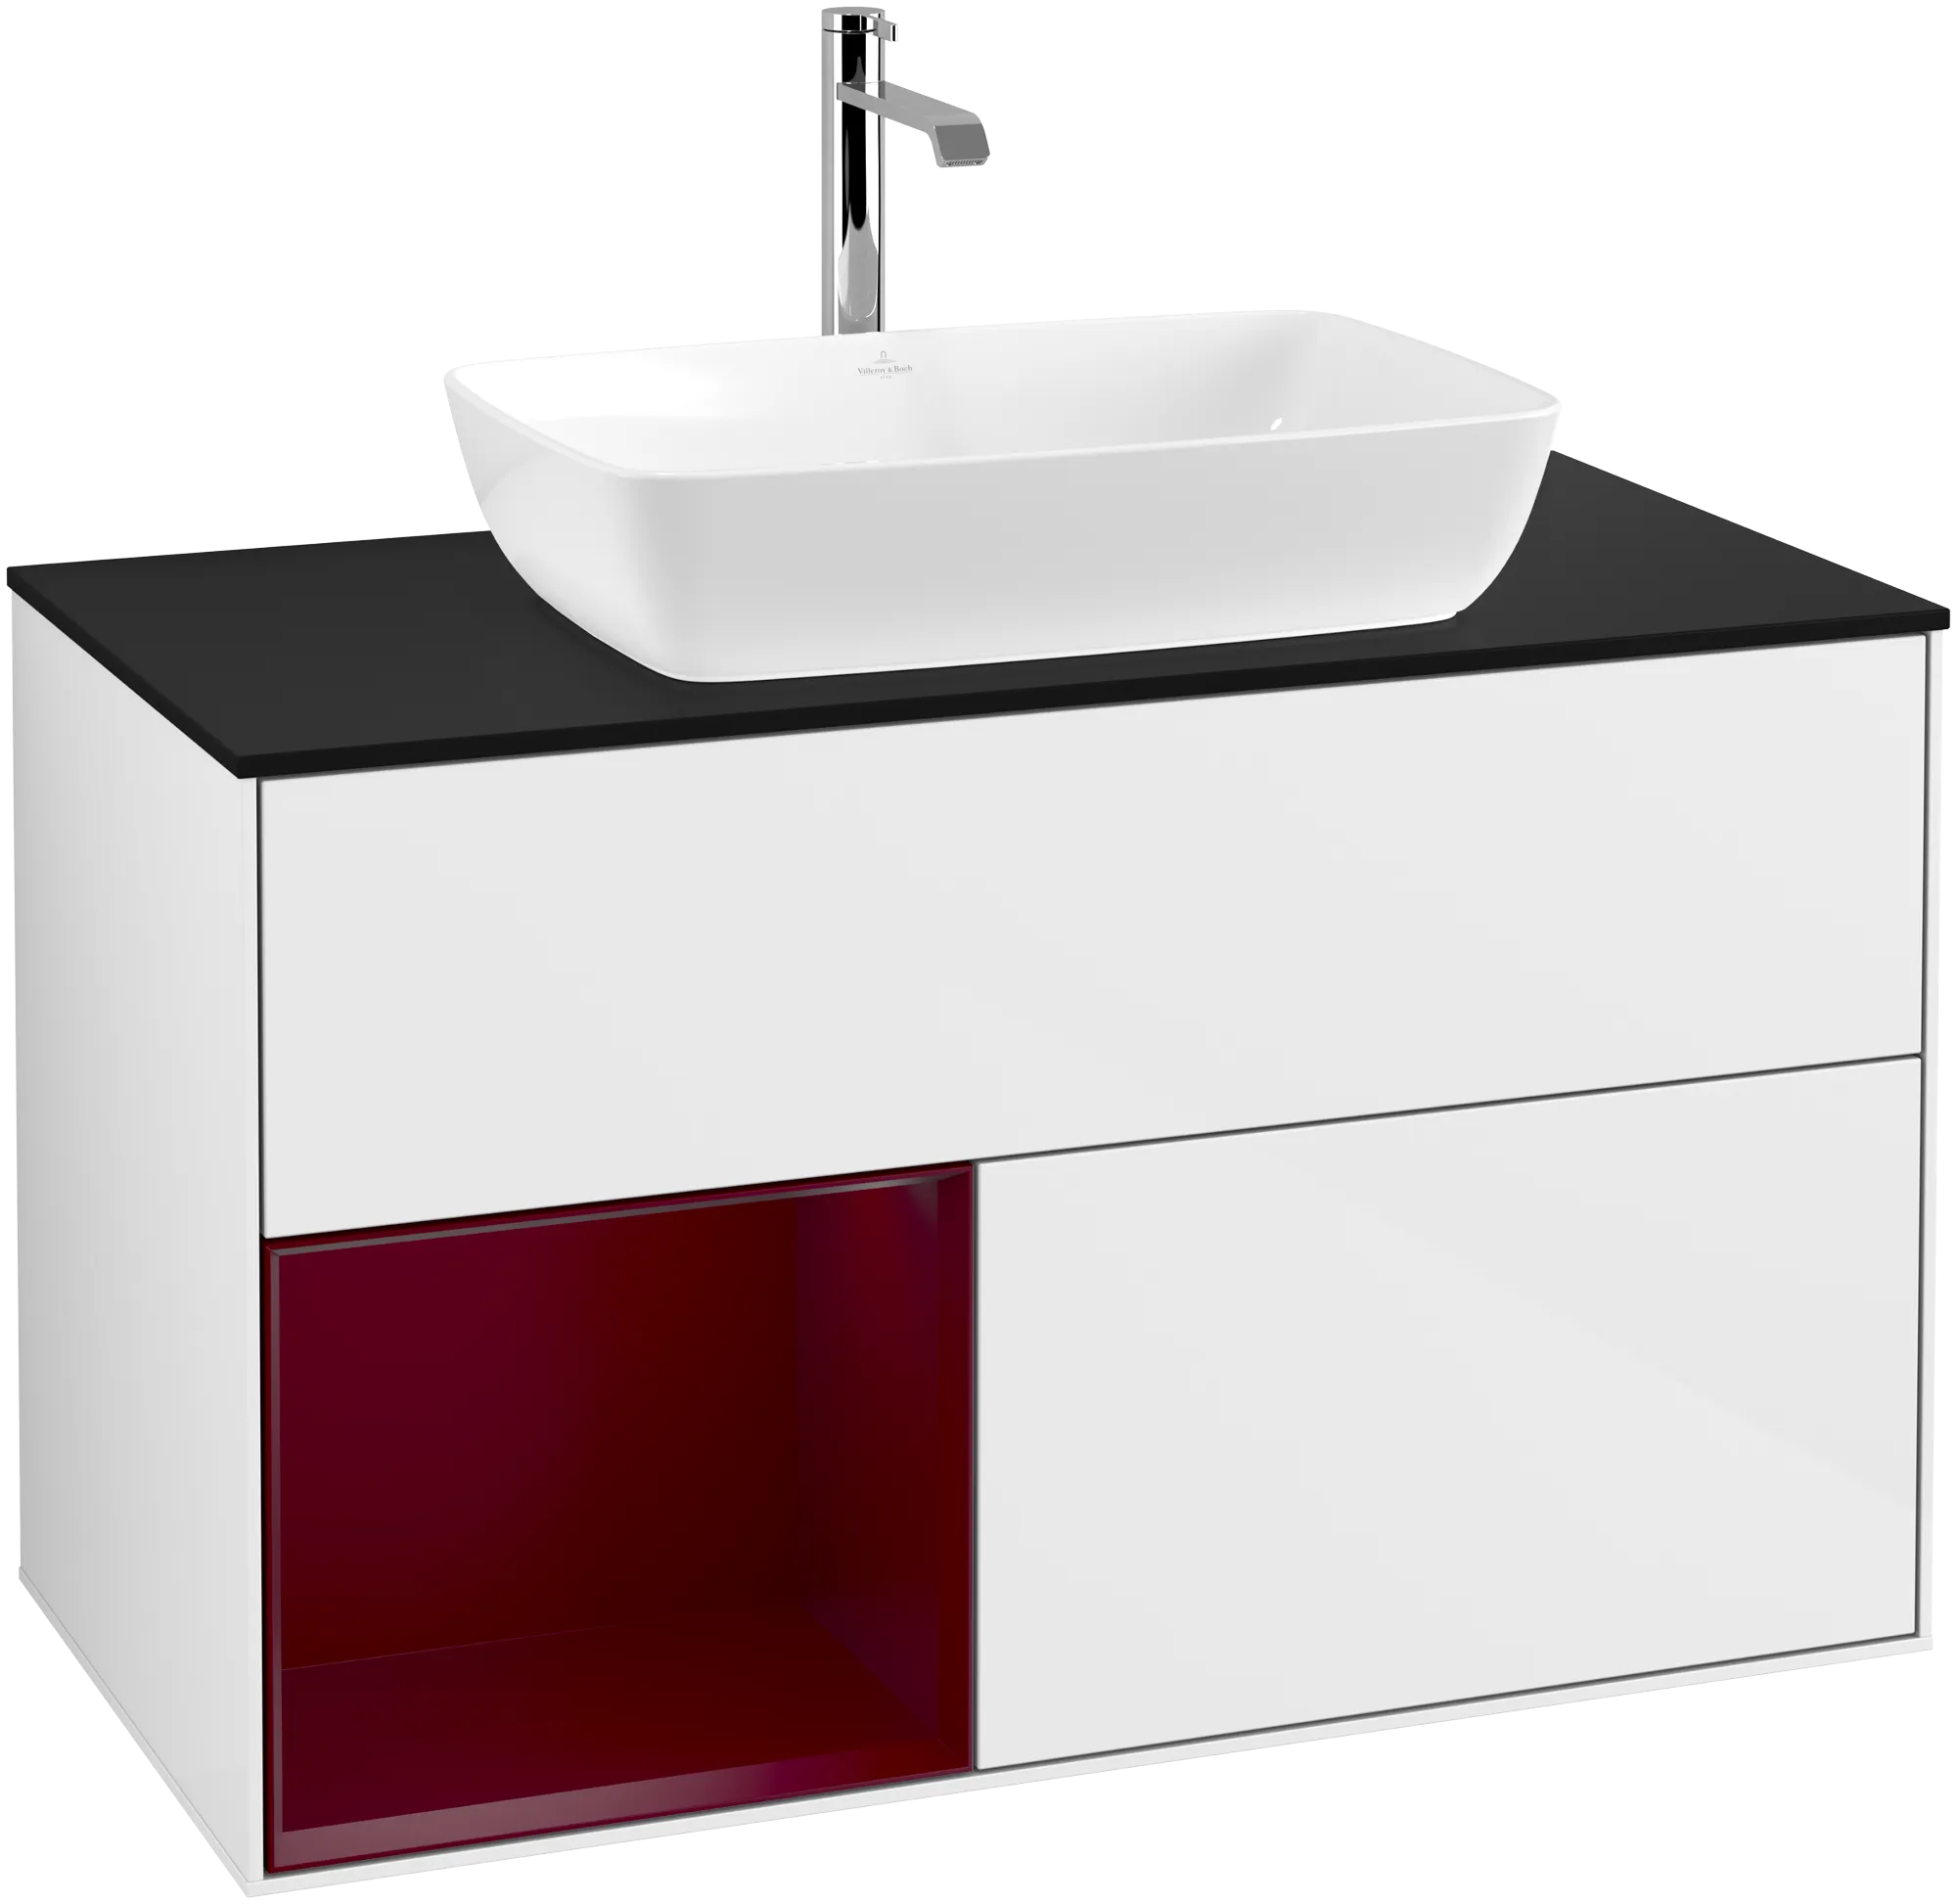 VILLEROY BOCH Finion Vanity unit, with lighting, 2 pull-out compartments, 1000 x 603 x 501 mm, Glossy White Lacquer / Peony Matt Lacquer / Glass Black Matt #G772HBGF resmi